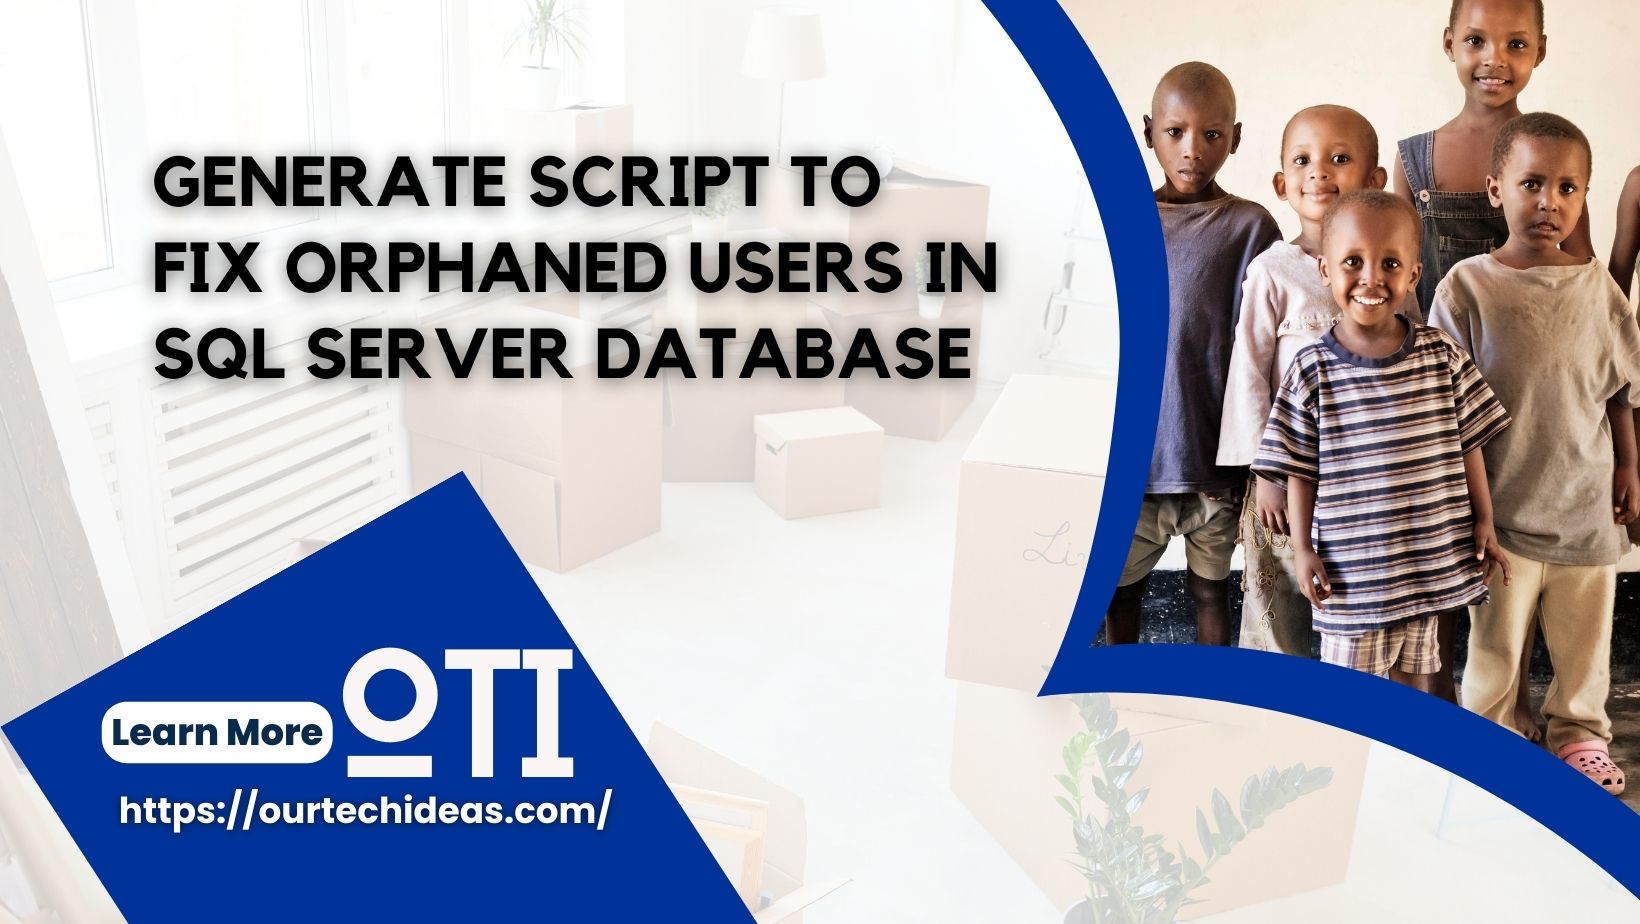 Generate Script to Fix Orphaned Users in SQL Server Database